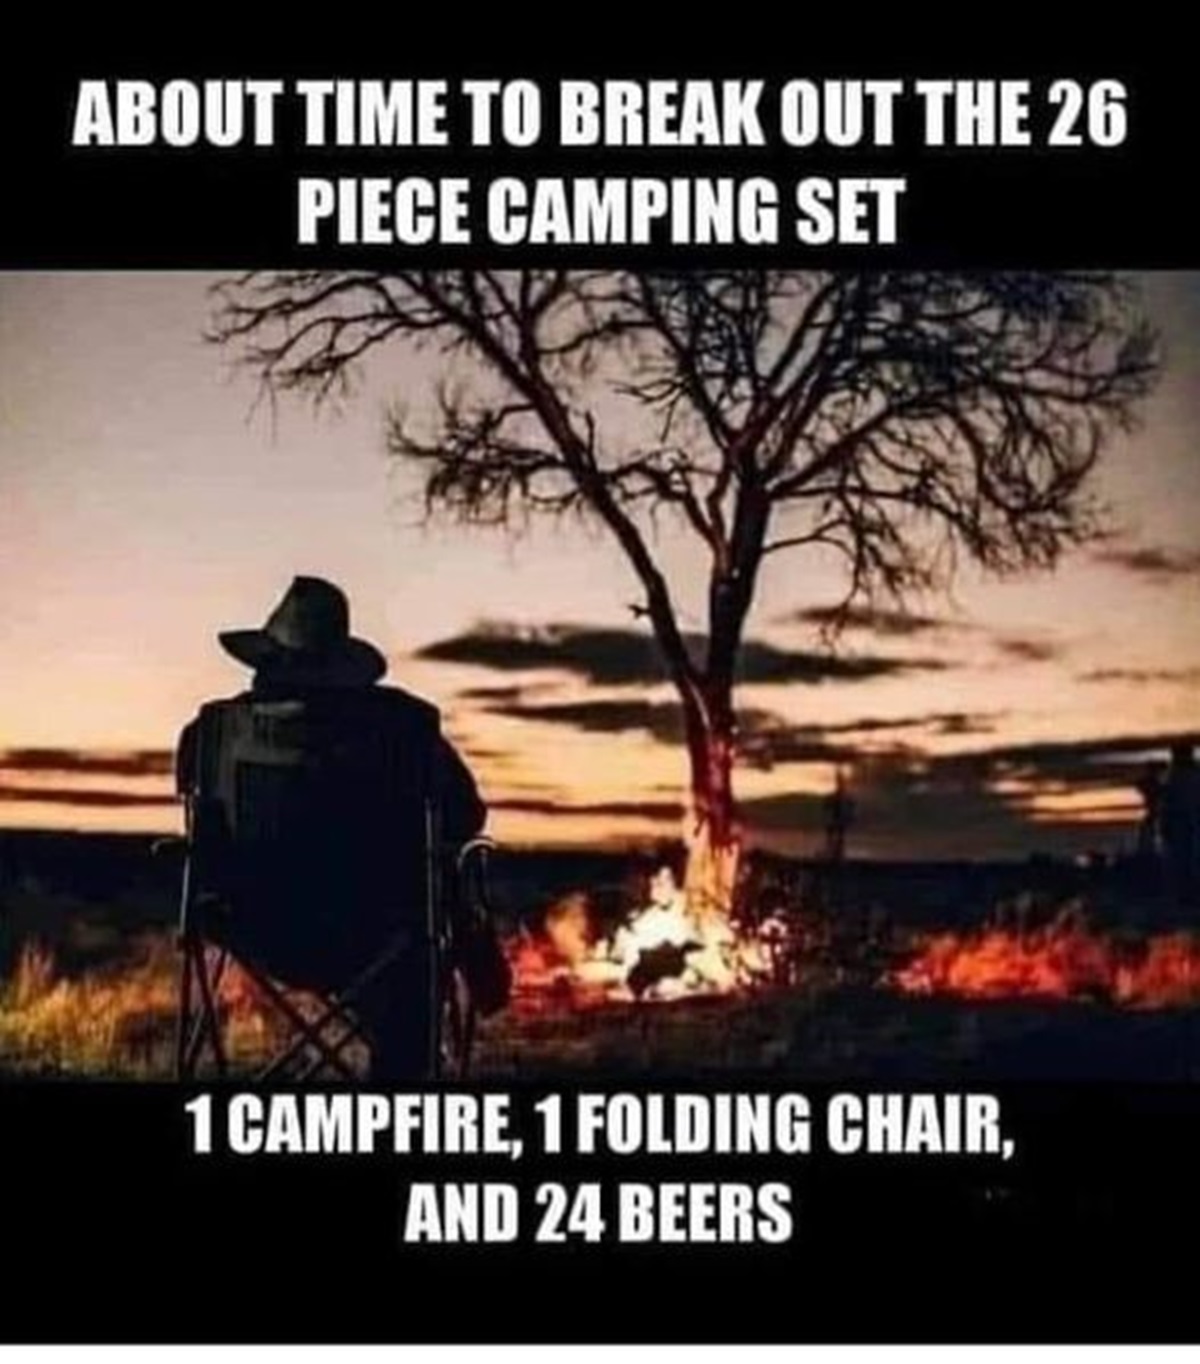 photo caption - About Time To Break Out The 26 Piece Camping Set 1 Campfire, 1 Folding Chair, And 24 Beers